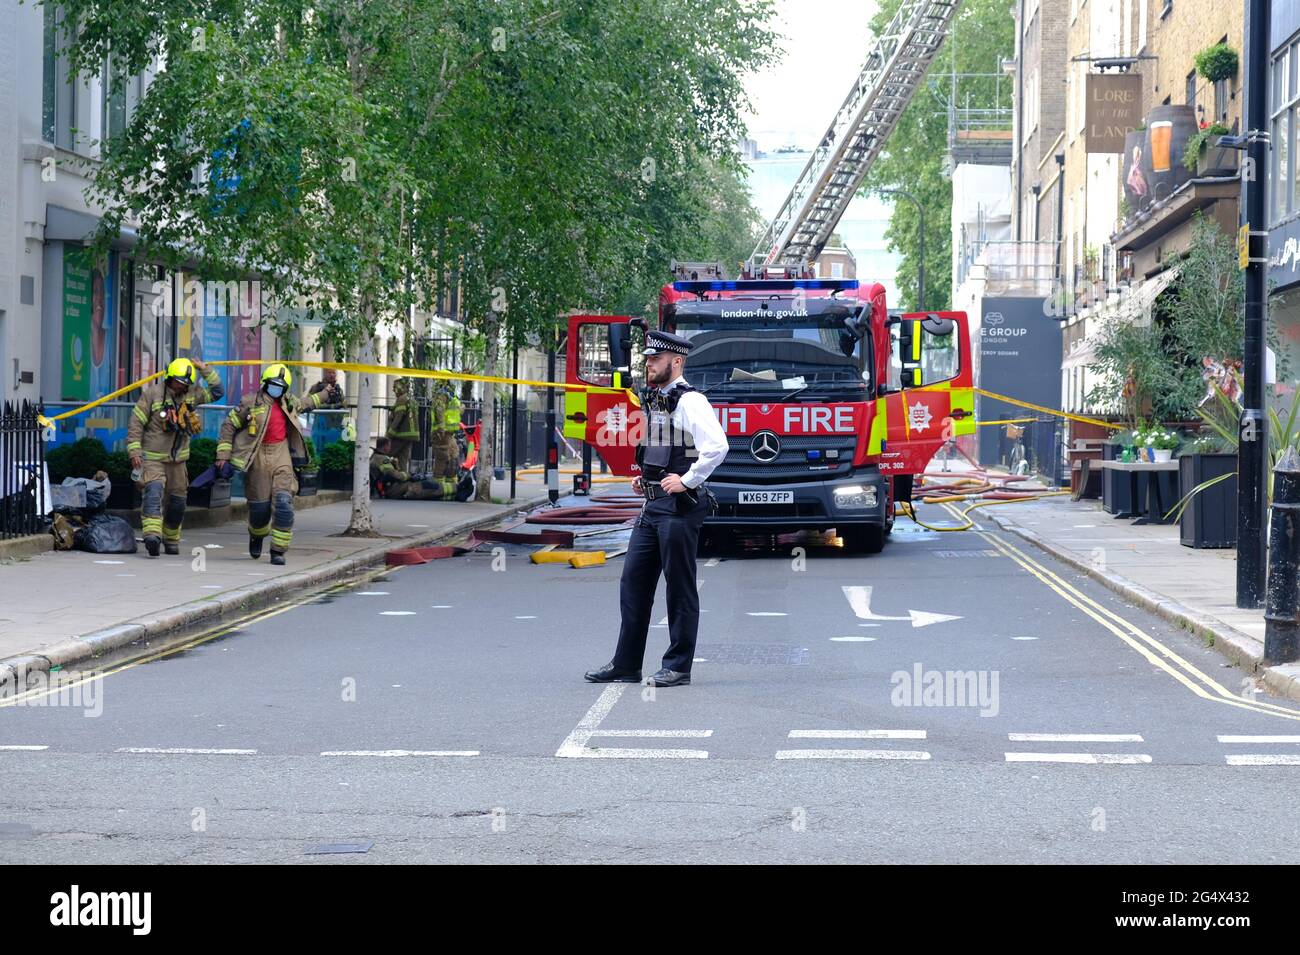 The emergency services attend the scene of a fire at the Lore of the Land pub in Fitzrovia, owned by film director Guy Ritchie. Stock Photo